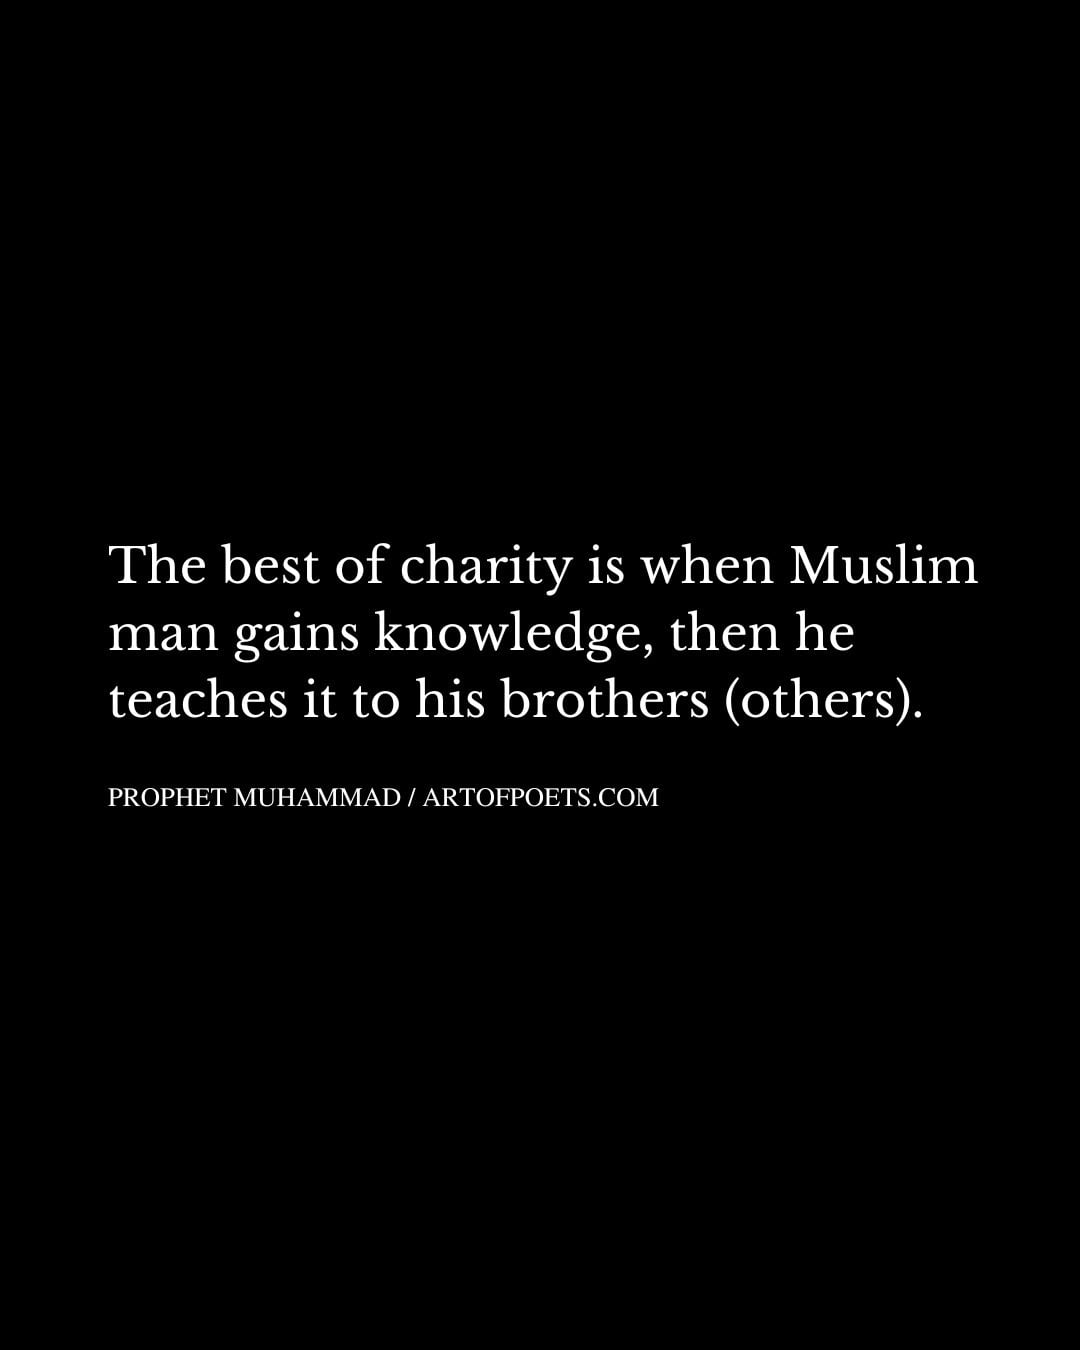 The best of charity is when Muslim man gains knowledge then he teaches it to his brothers others